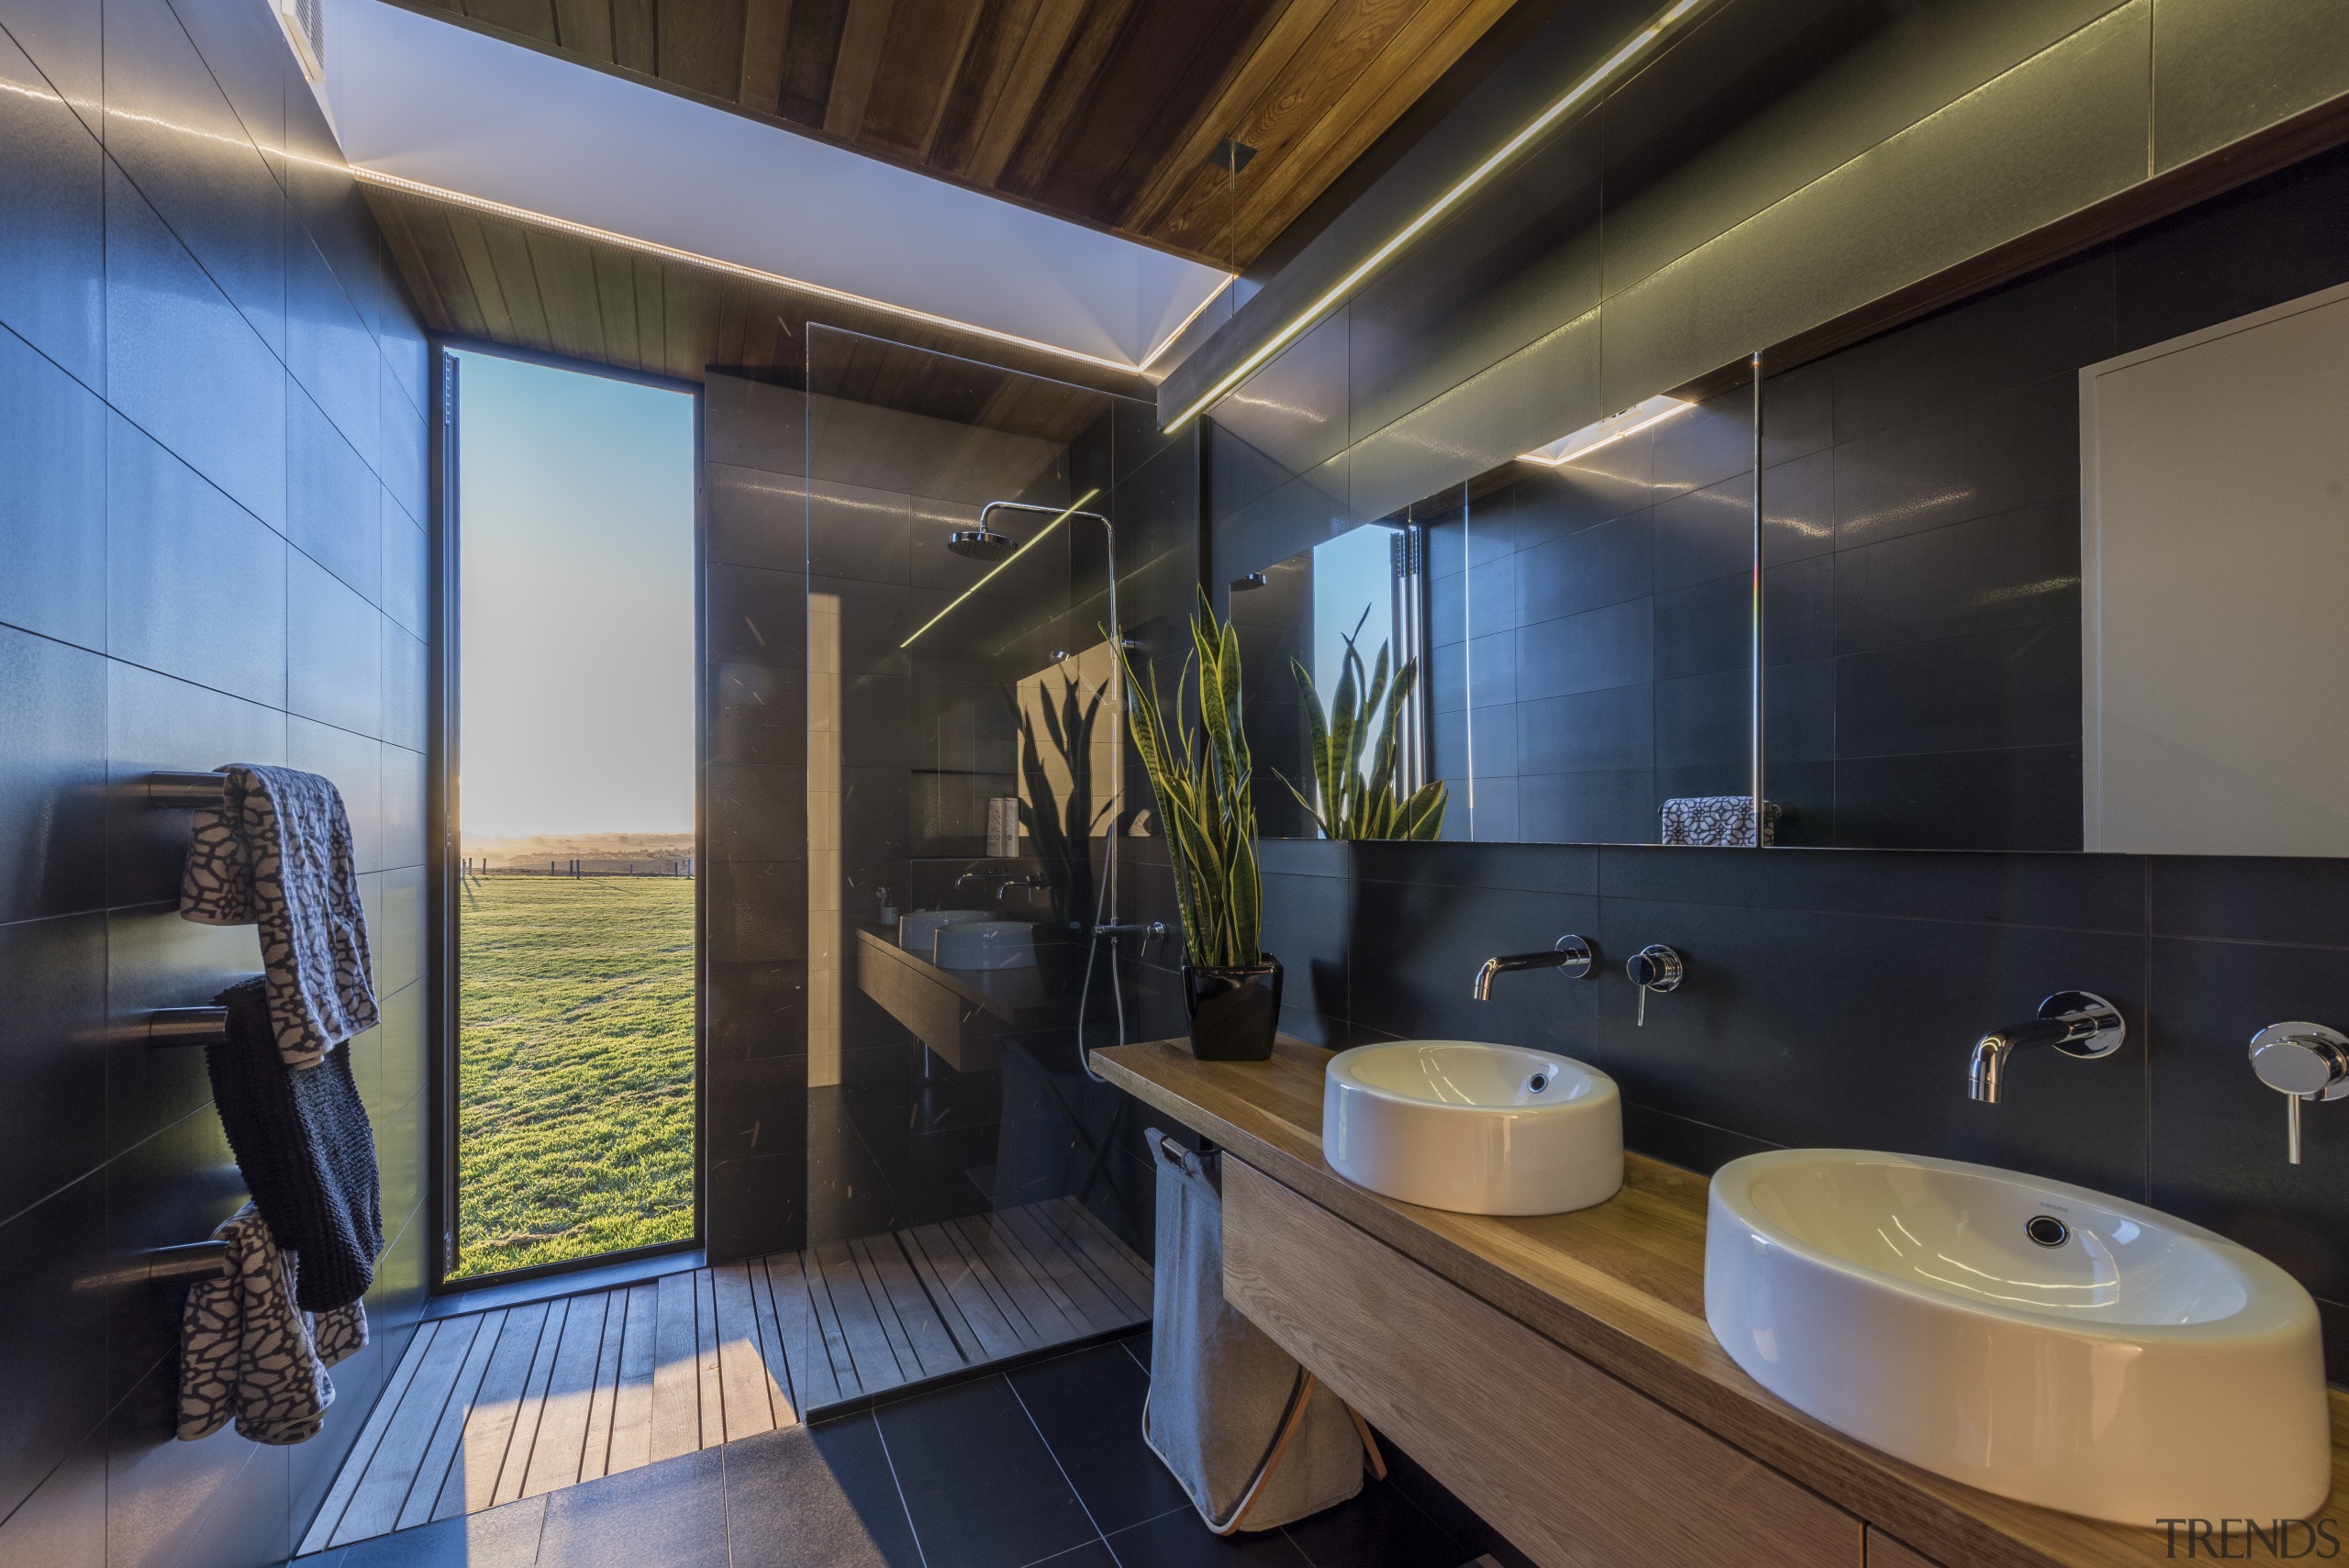 In a house with many vistas and framed architecture, bathroom, ceiling, interior design, real estate, room, black